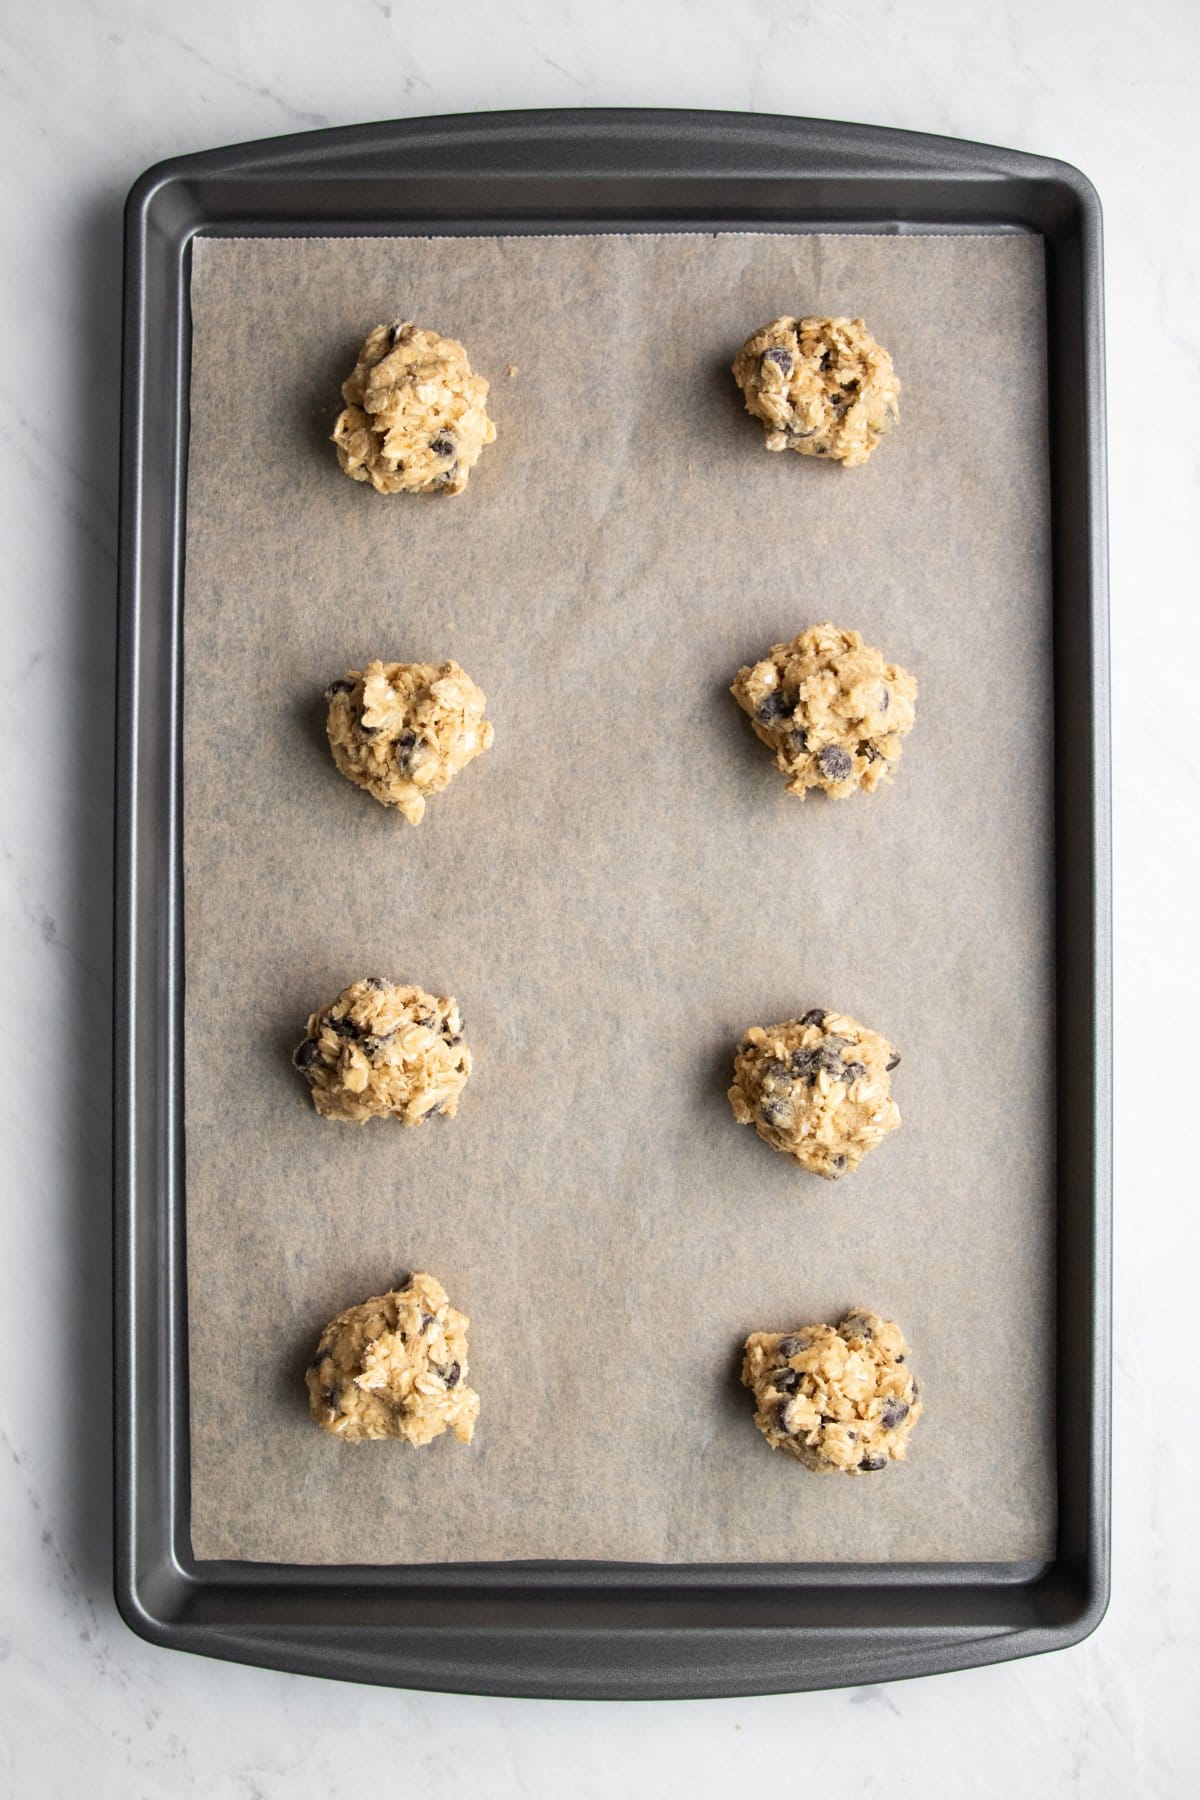 Eight cookie dough balls on a baking sheet lined with parchment paper.